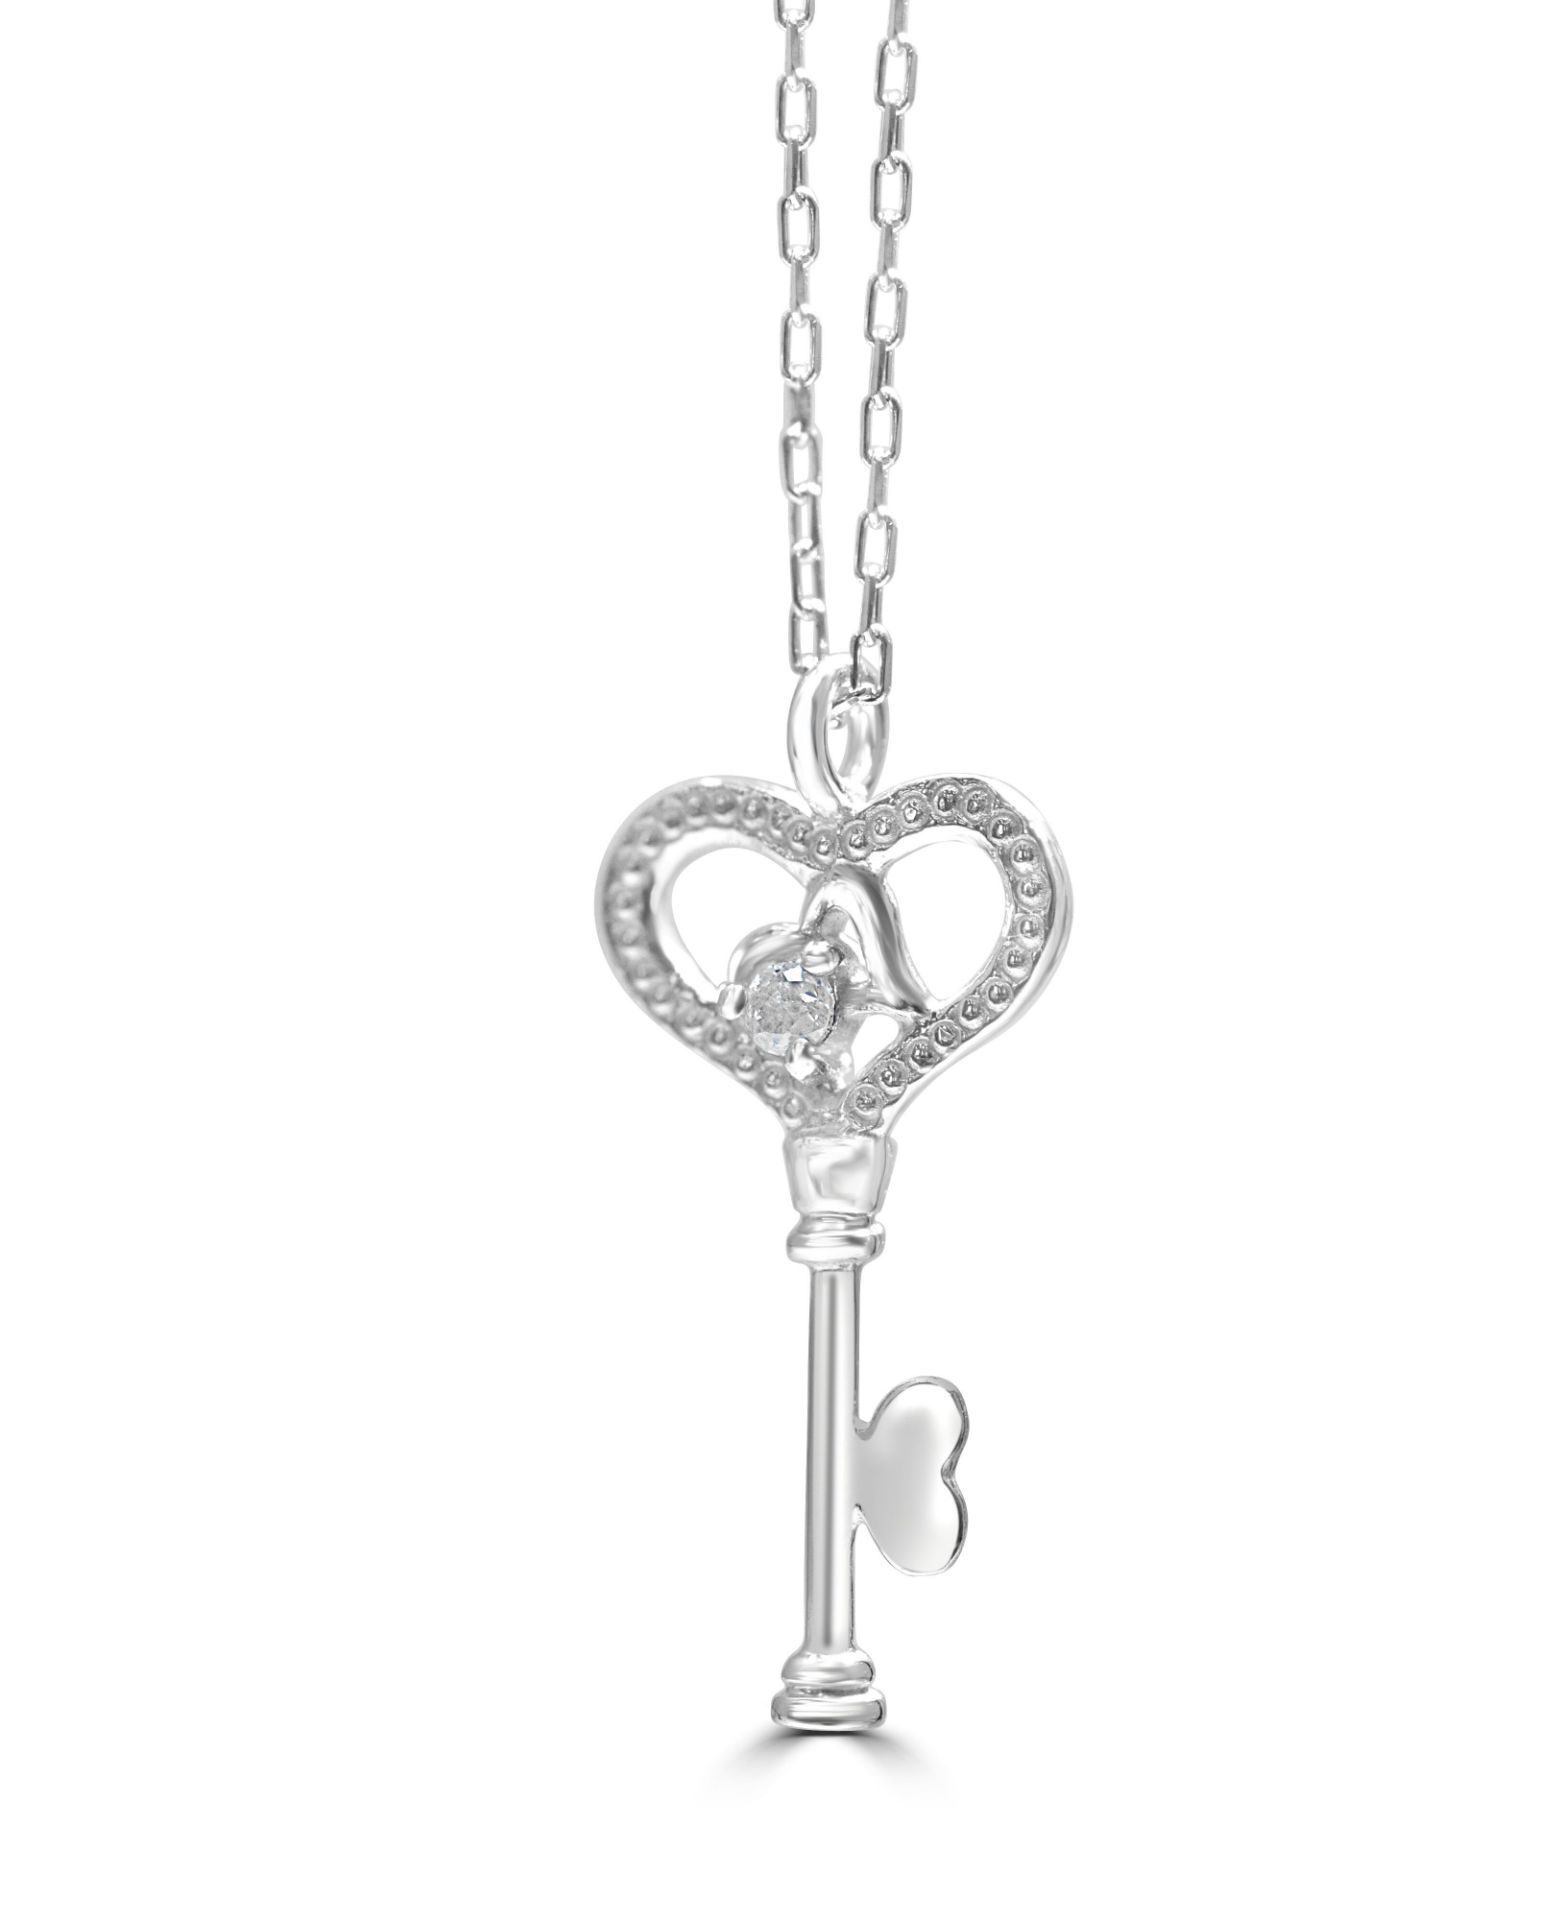 Diamond Pendant Key in 9ct White Gold With 16 Inch Chain RRP £250